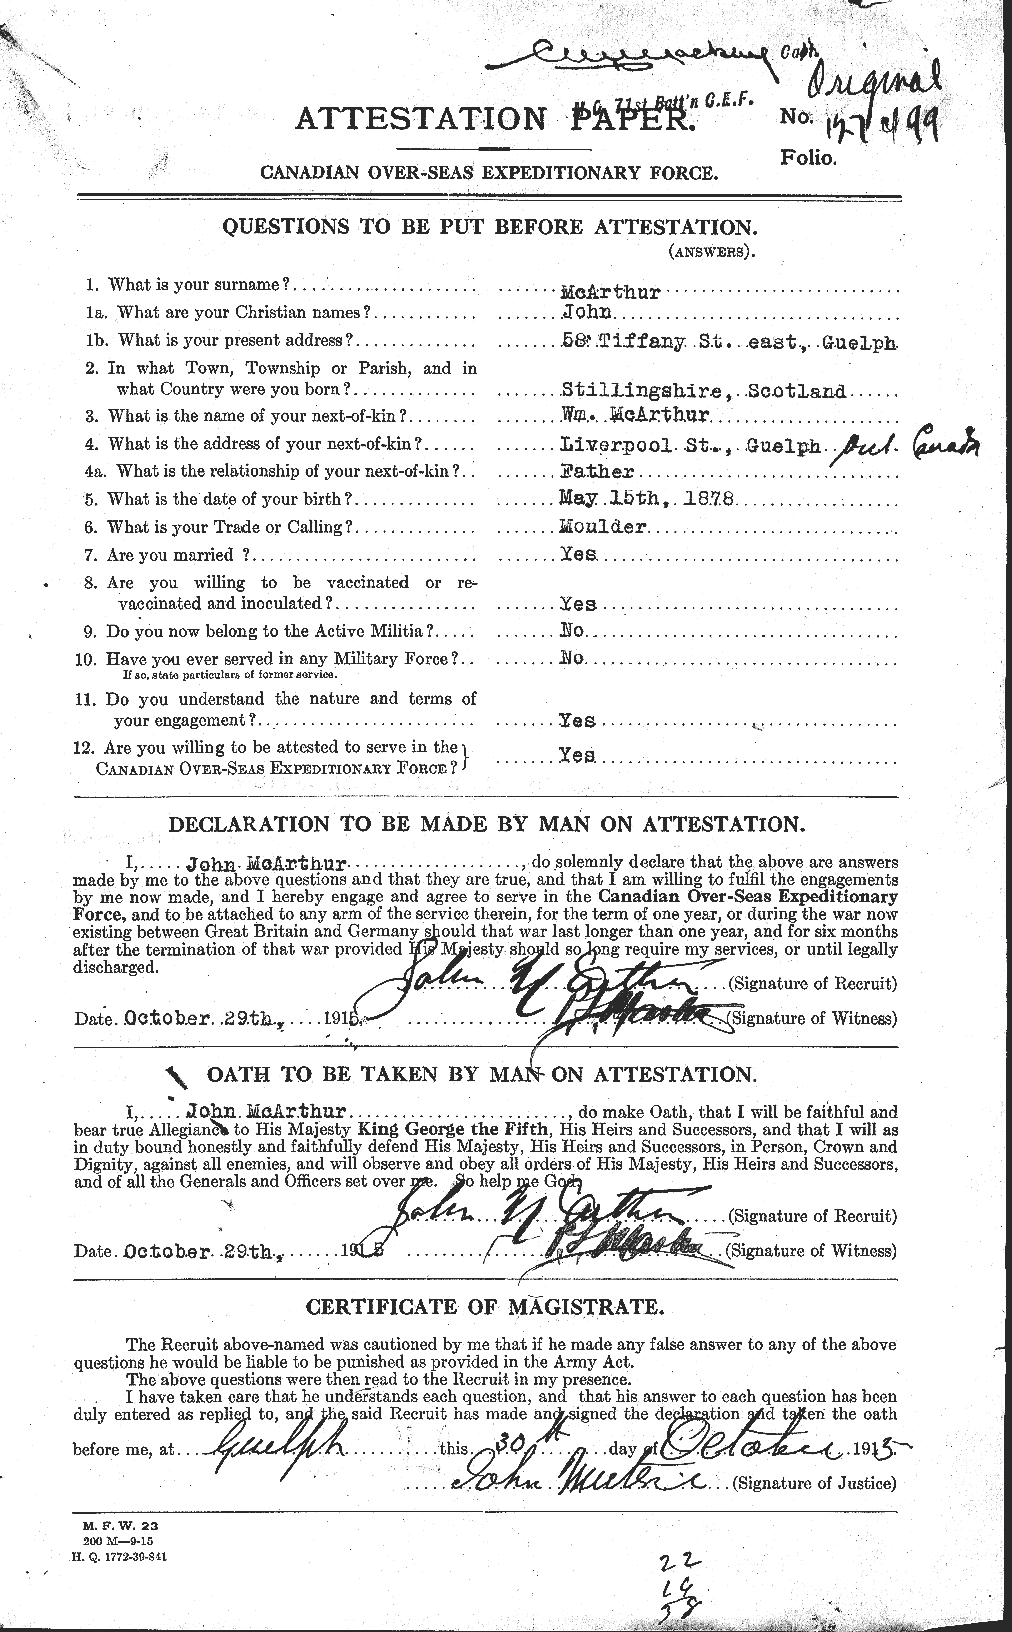 Personnel Records of the First World War - CEF 130847a